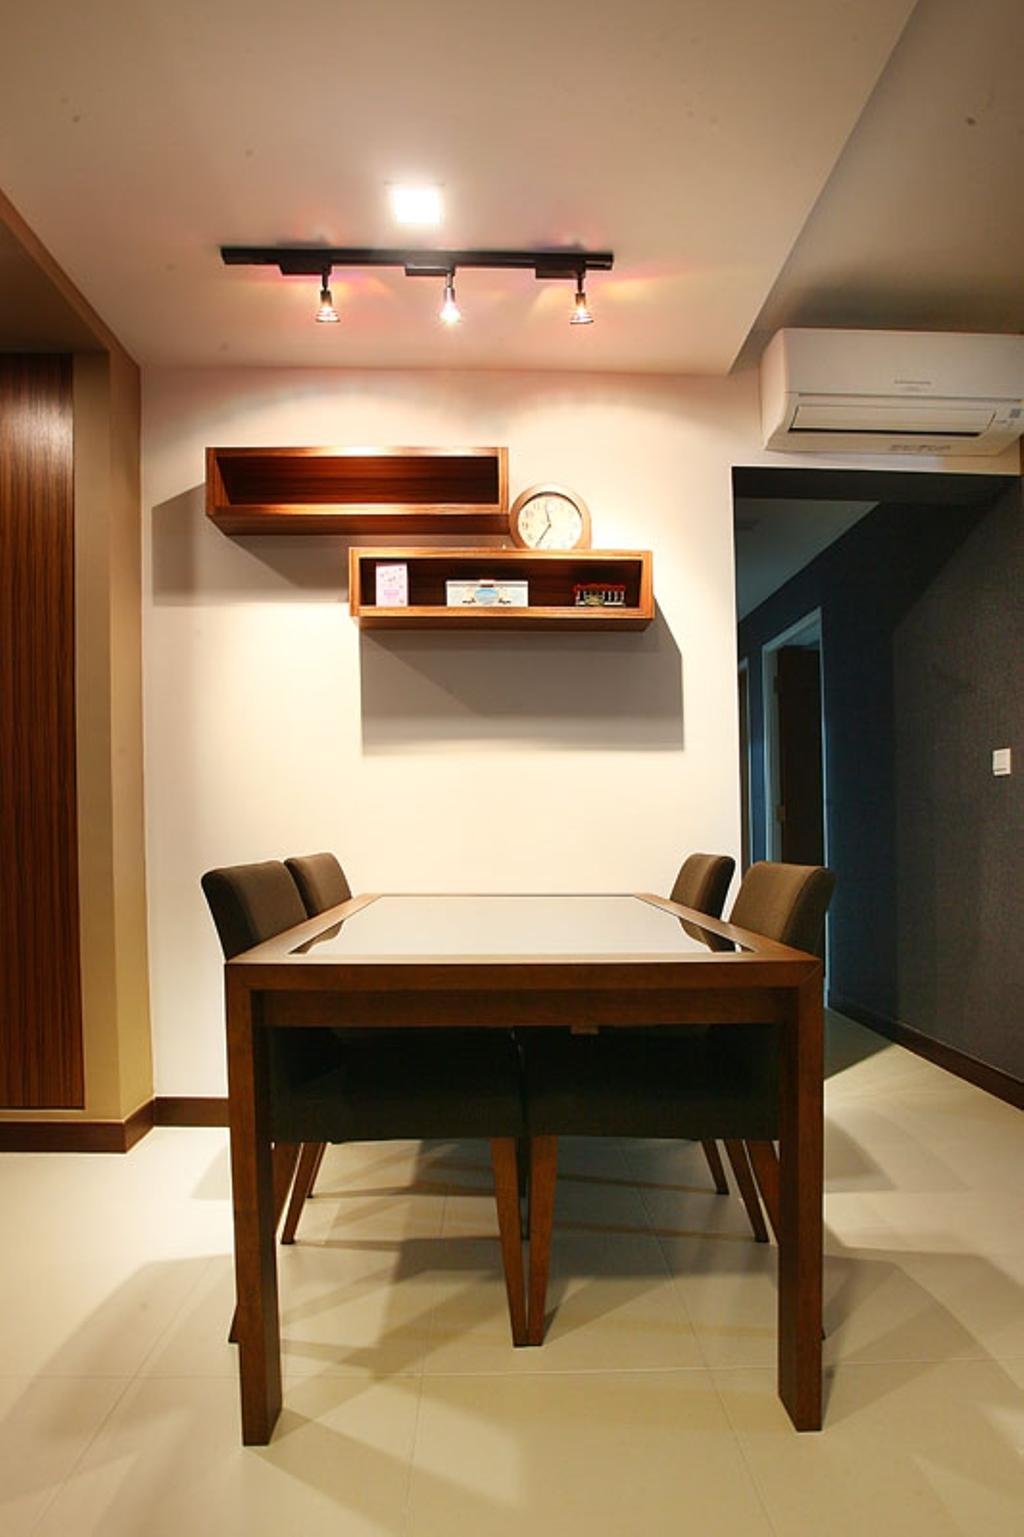 Transitional, HDB, Dining Room, Buangkok Green, Interior Designer, Fineline Design, Track Lights, Track Lighting, Wall Shelves, Shelves, Shelving, Dining Table, Dining Chairs, Chairs, Aircon, Couch, Furniture, Chair